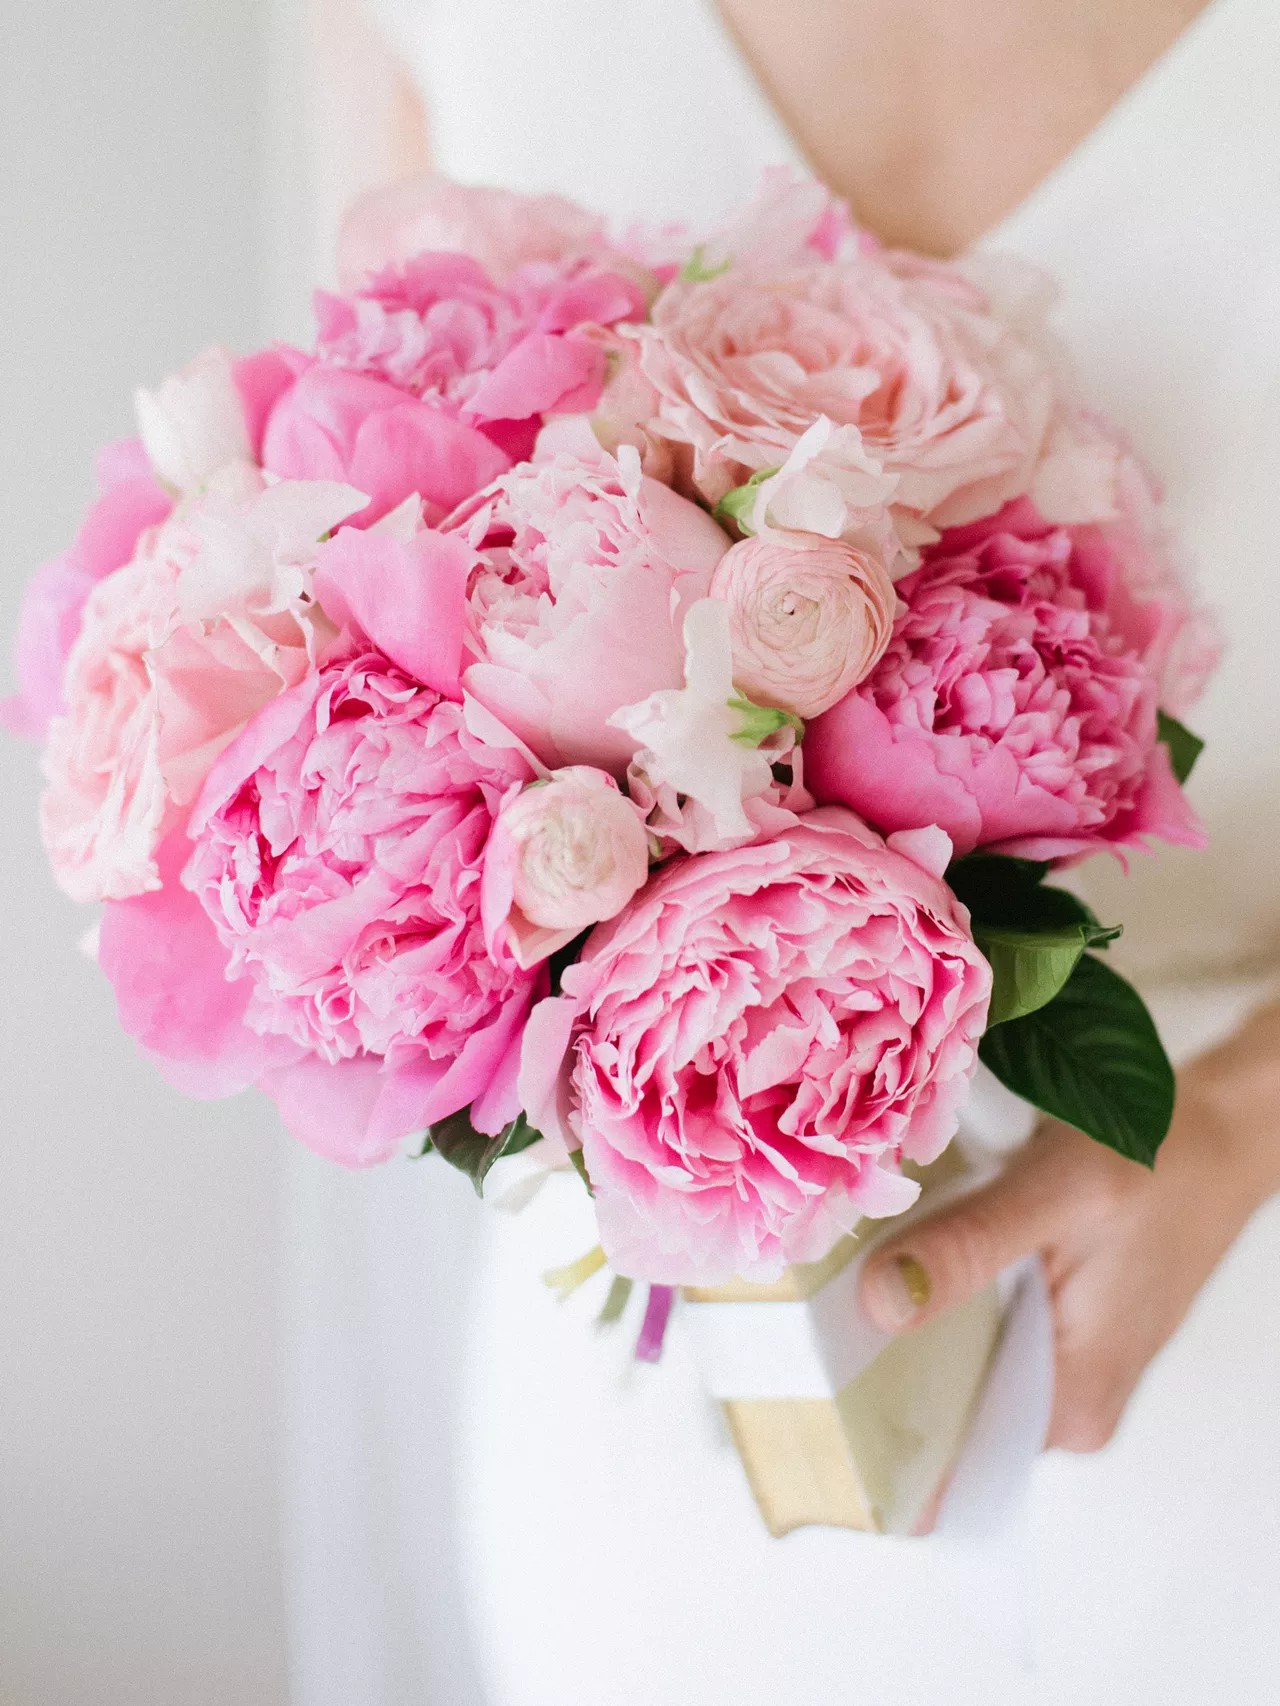 10 Most Popular Wedding Flowers For Awesome Bridal Flower Bouquet